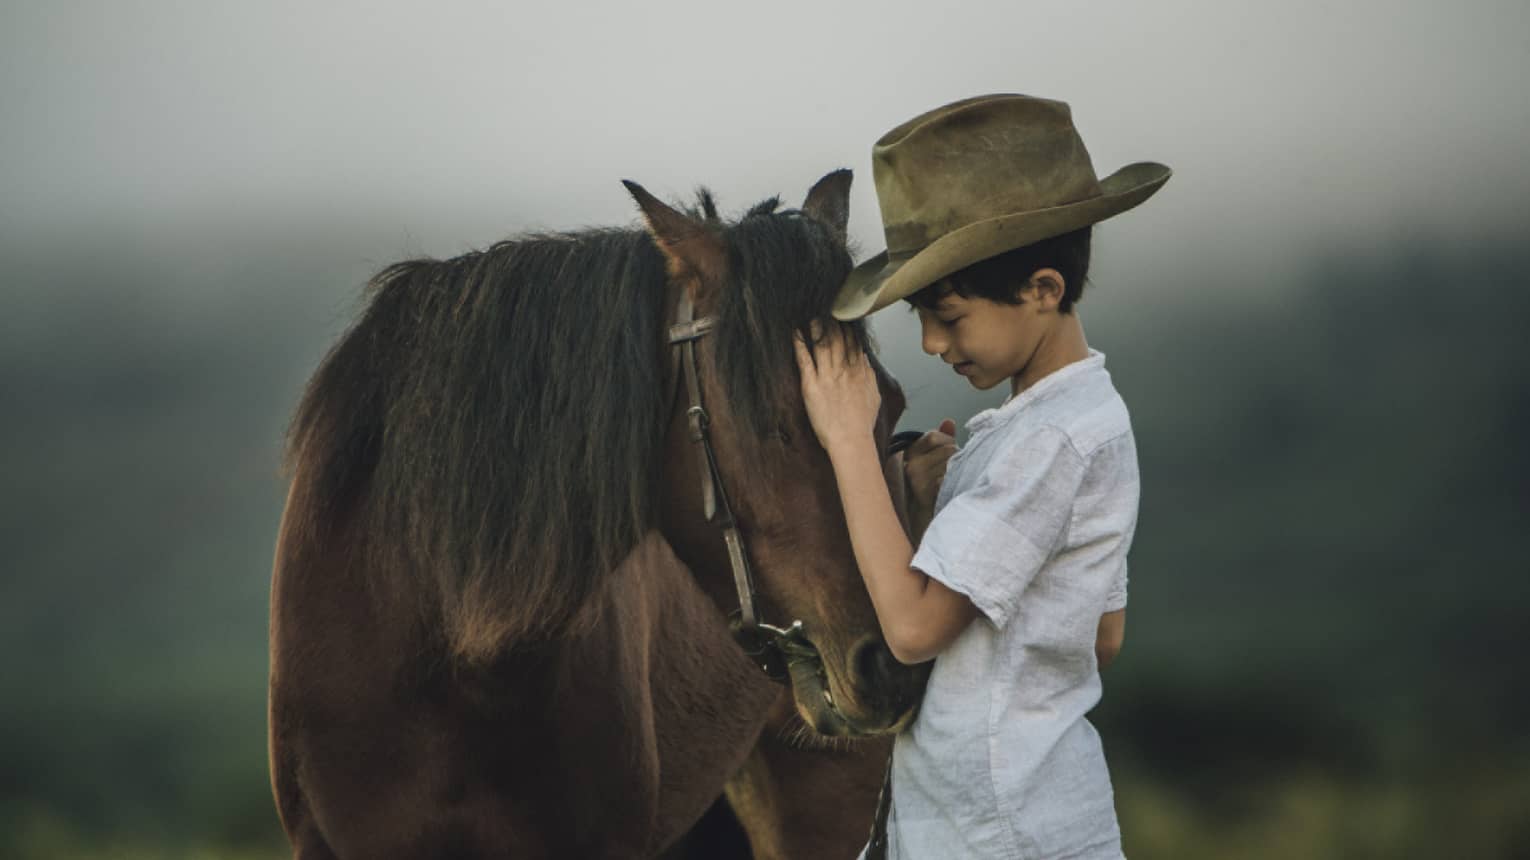 A young boy in a cowboy hat petting a horse in an open field